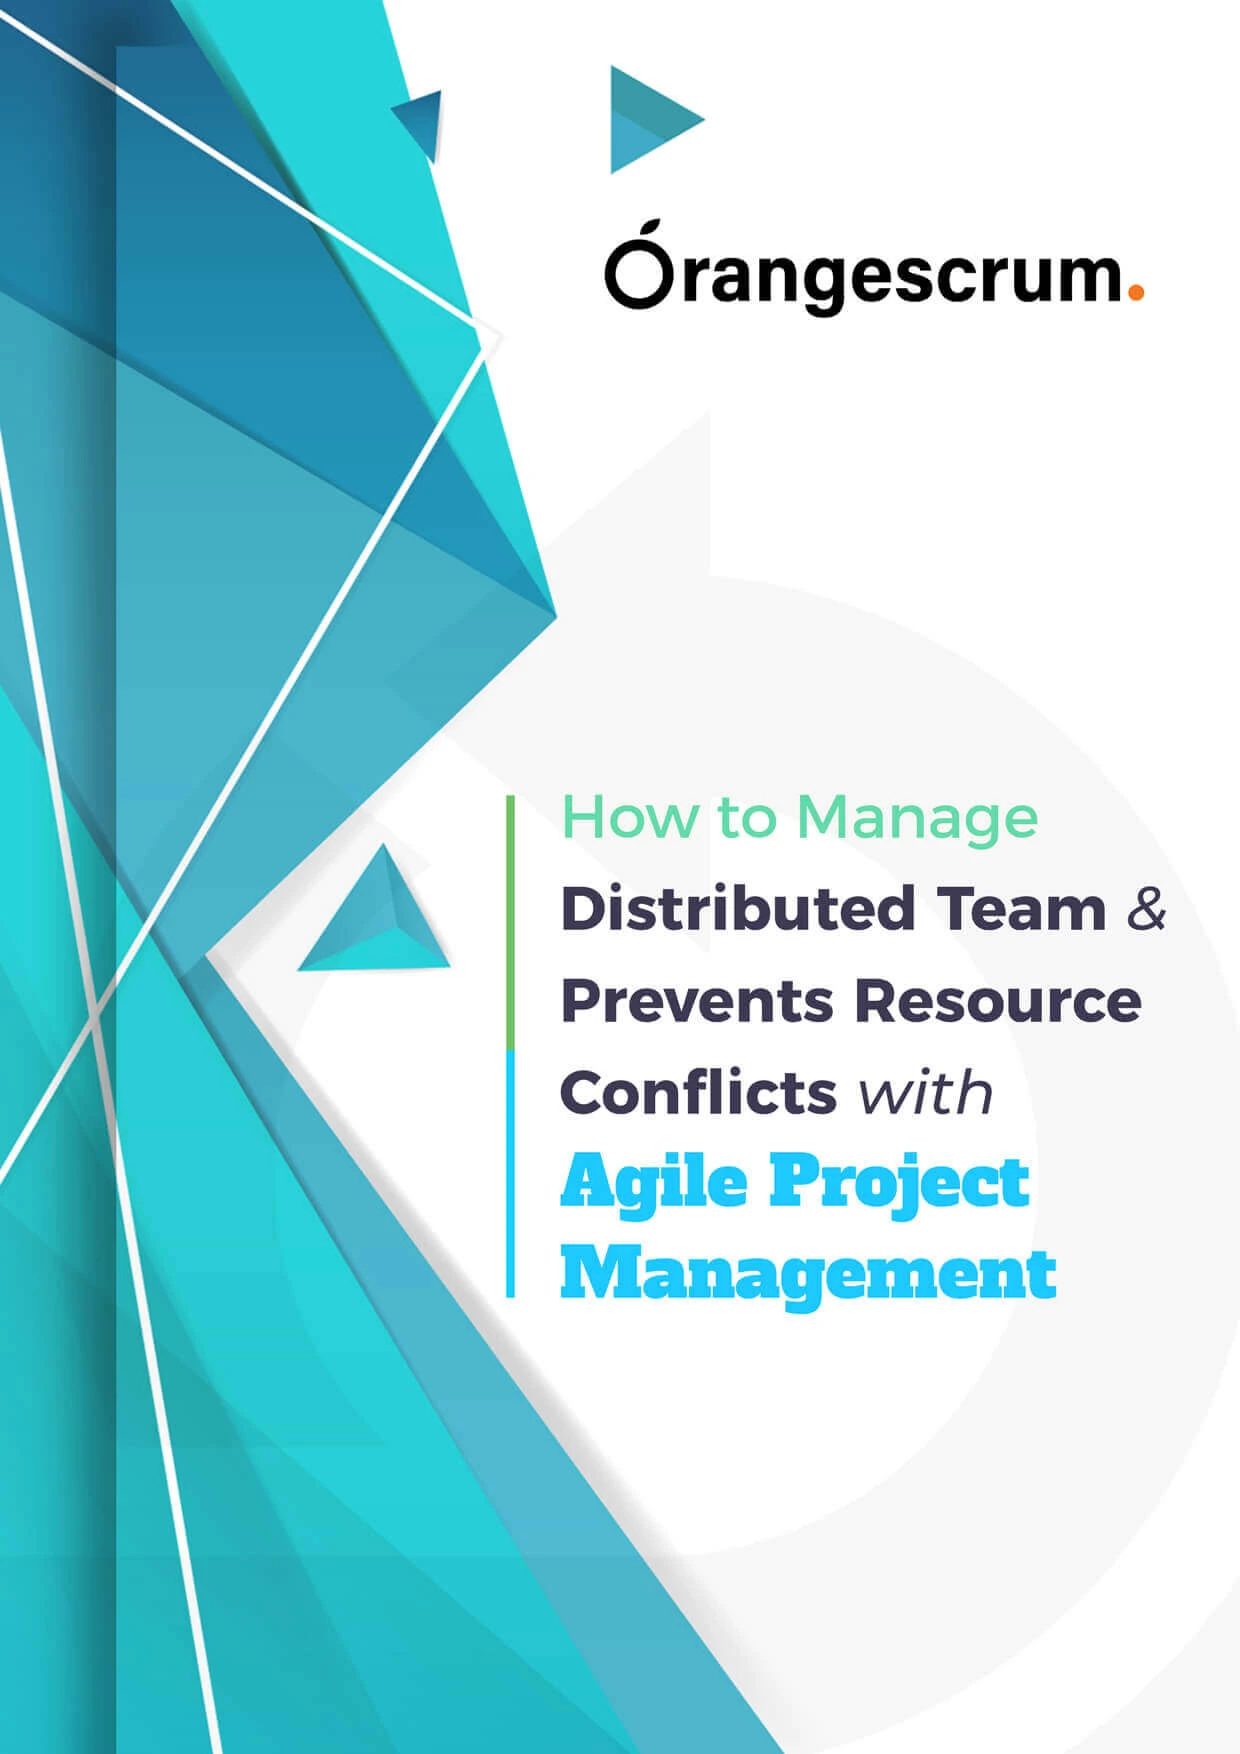 How to Manage Distributed Team & Prevents Resource Conflicts with Agile Project Management